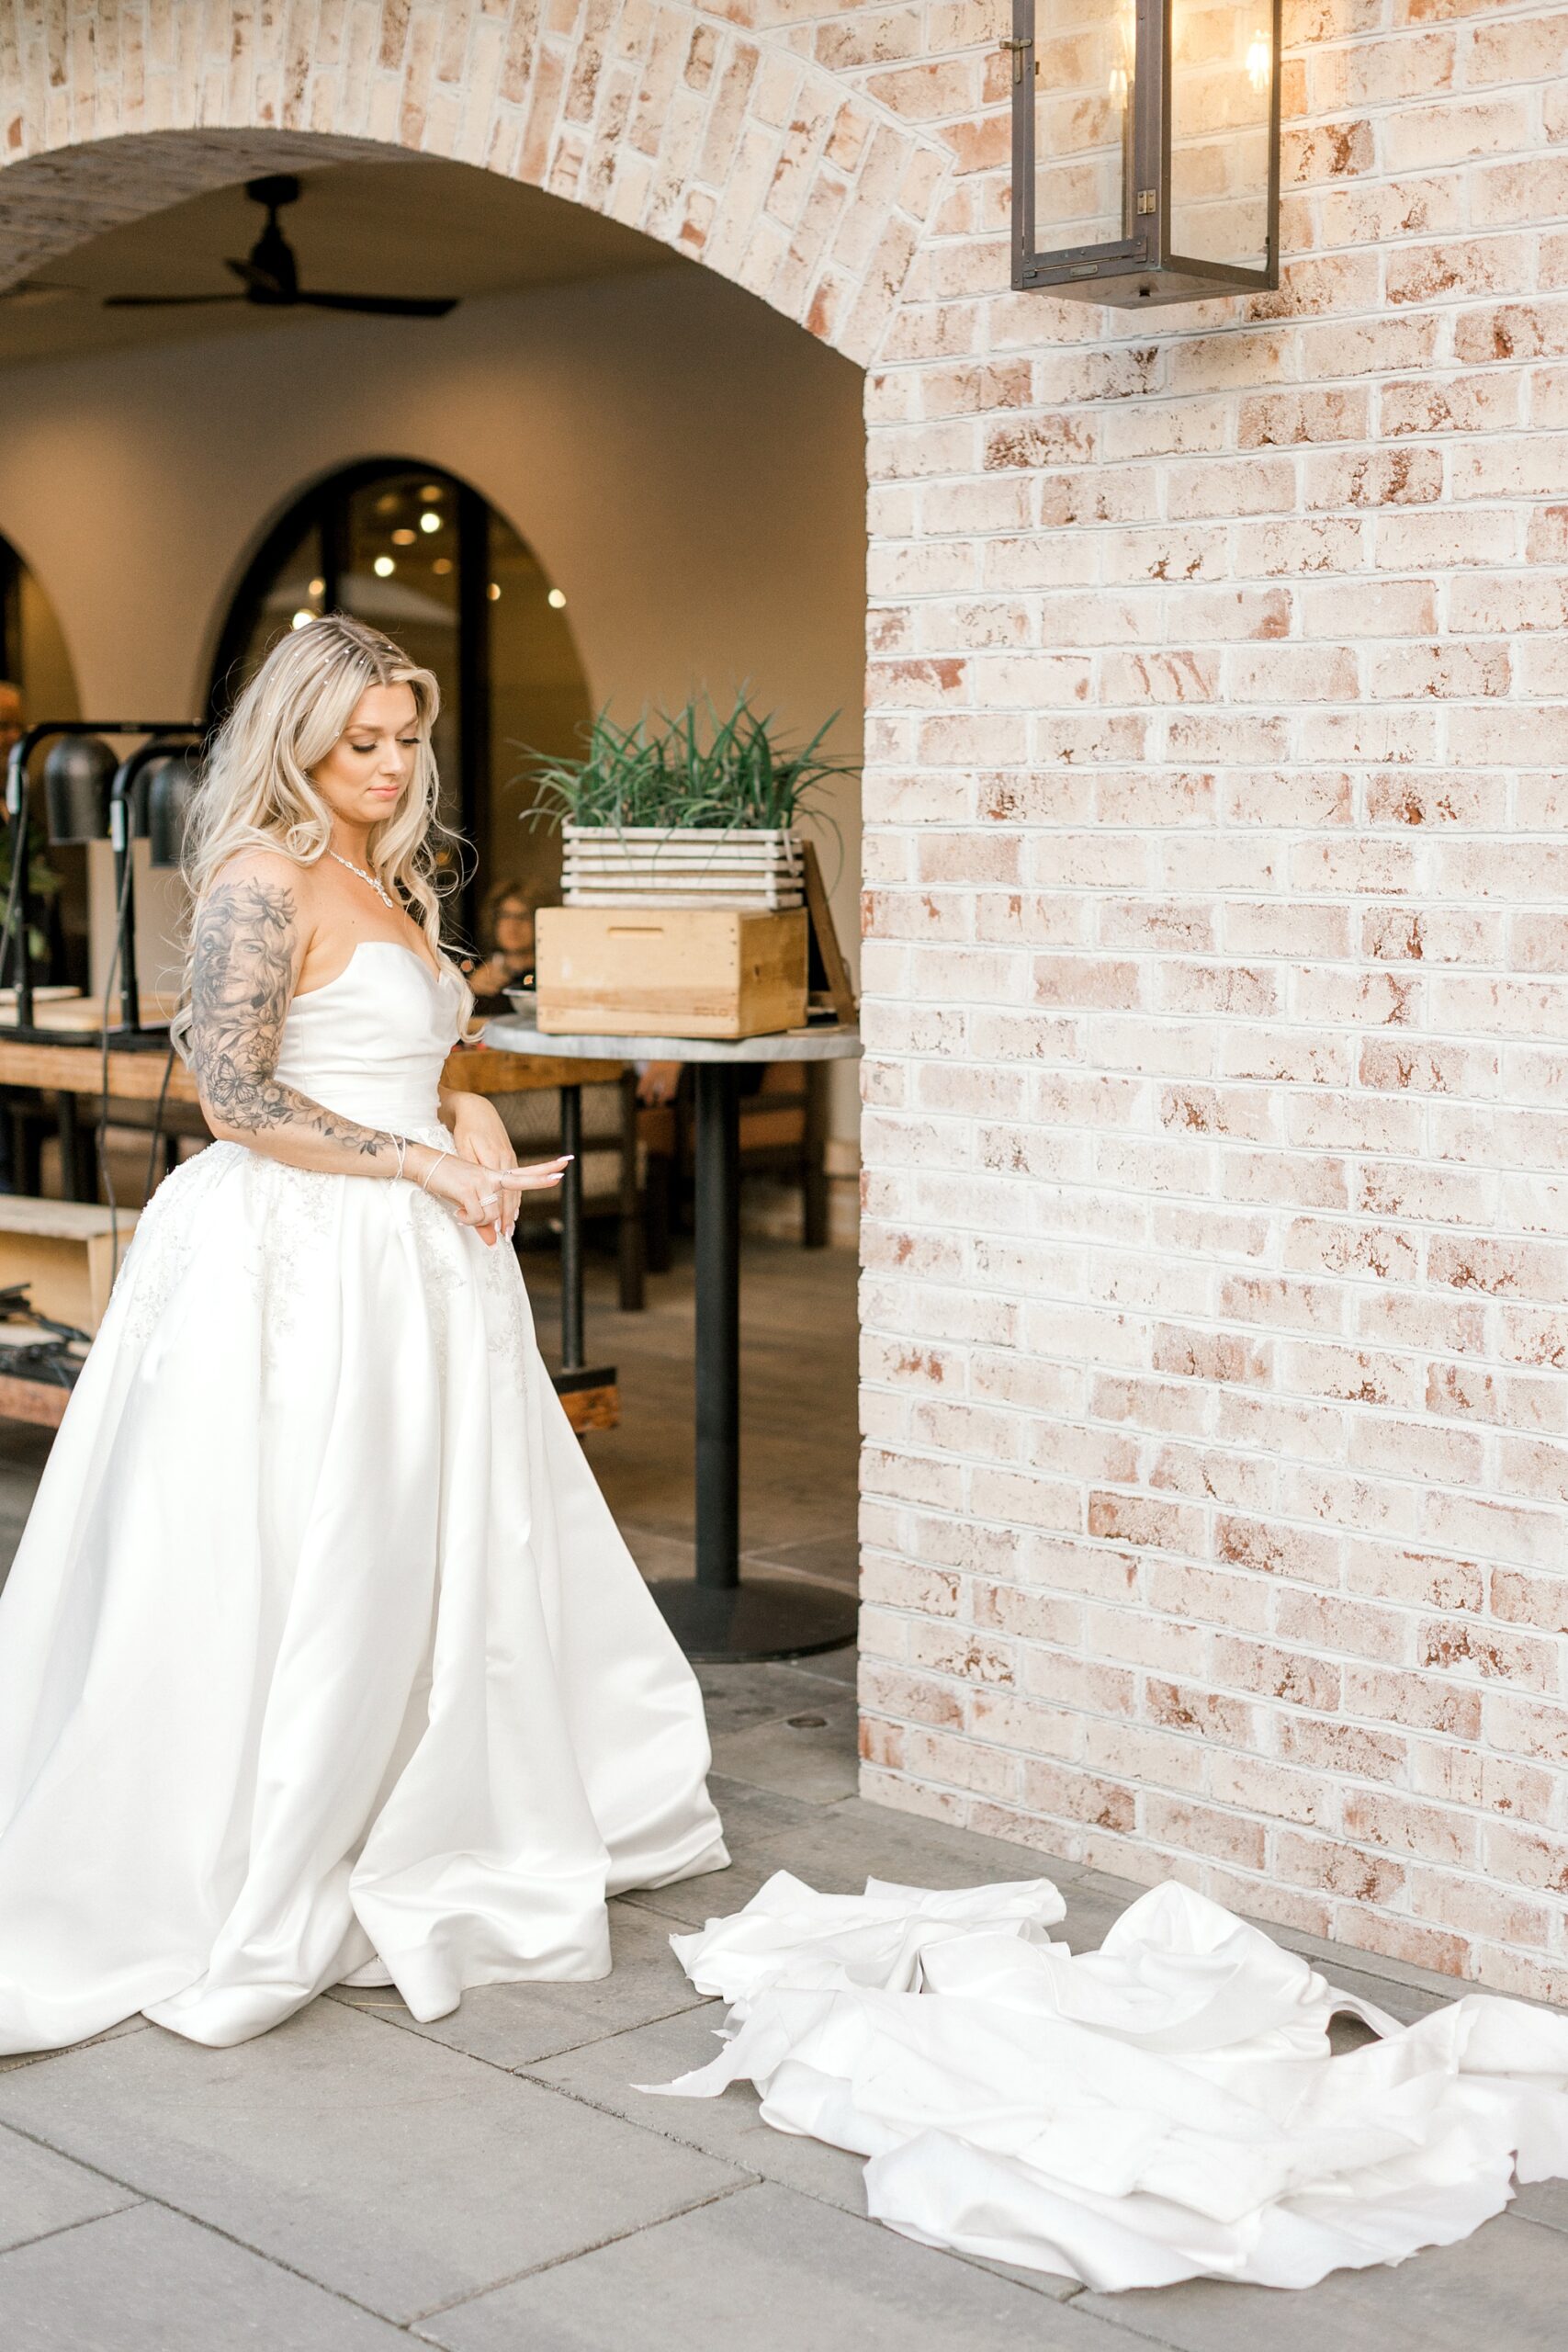 bride looks at scraps of wedding dress during reception